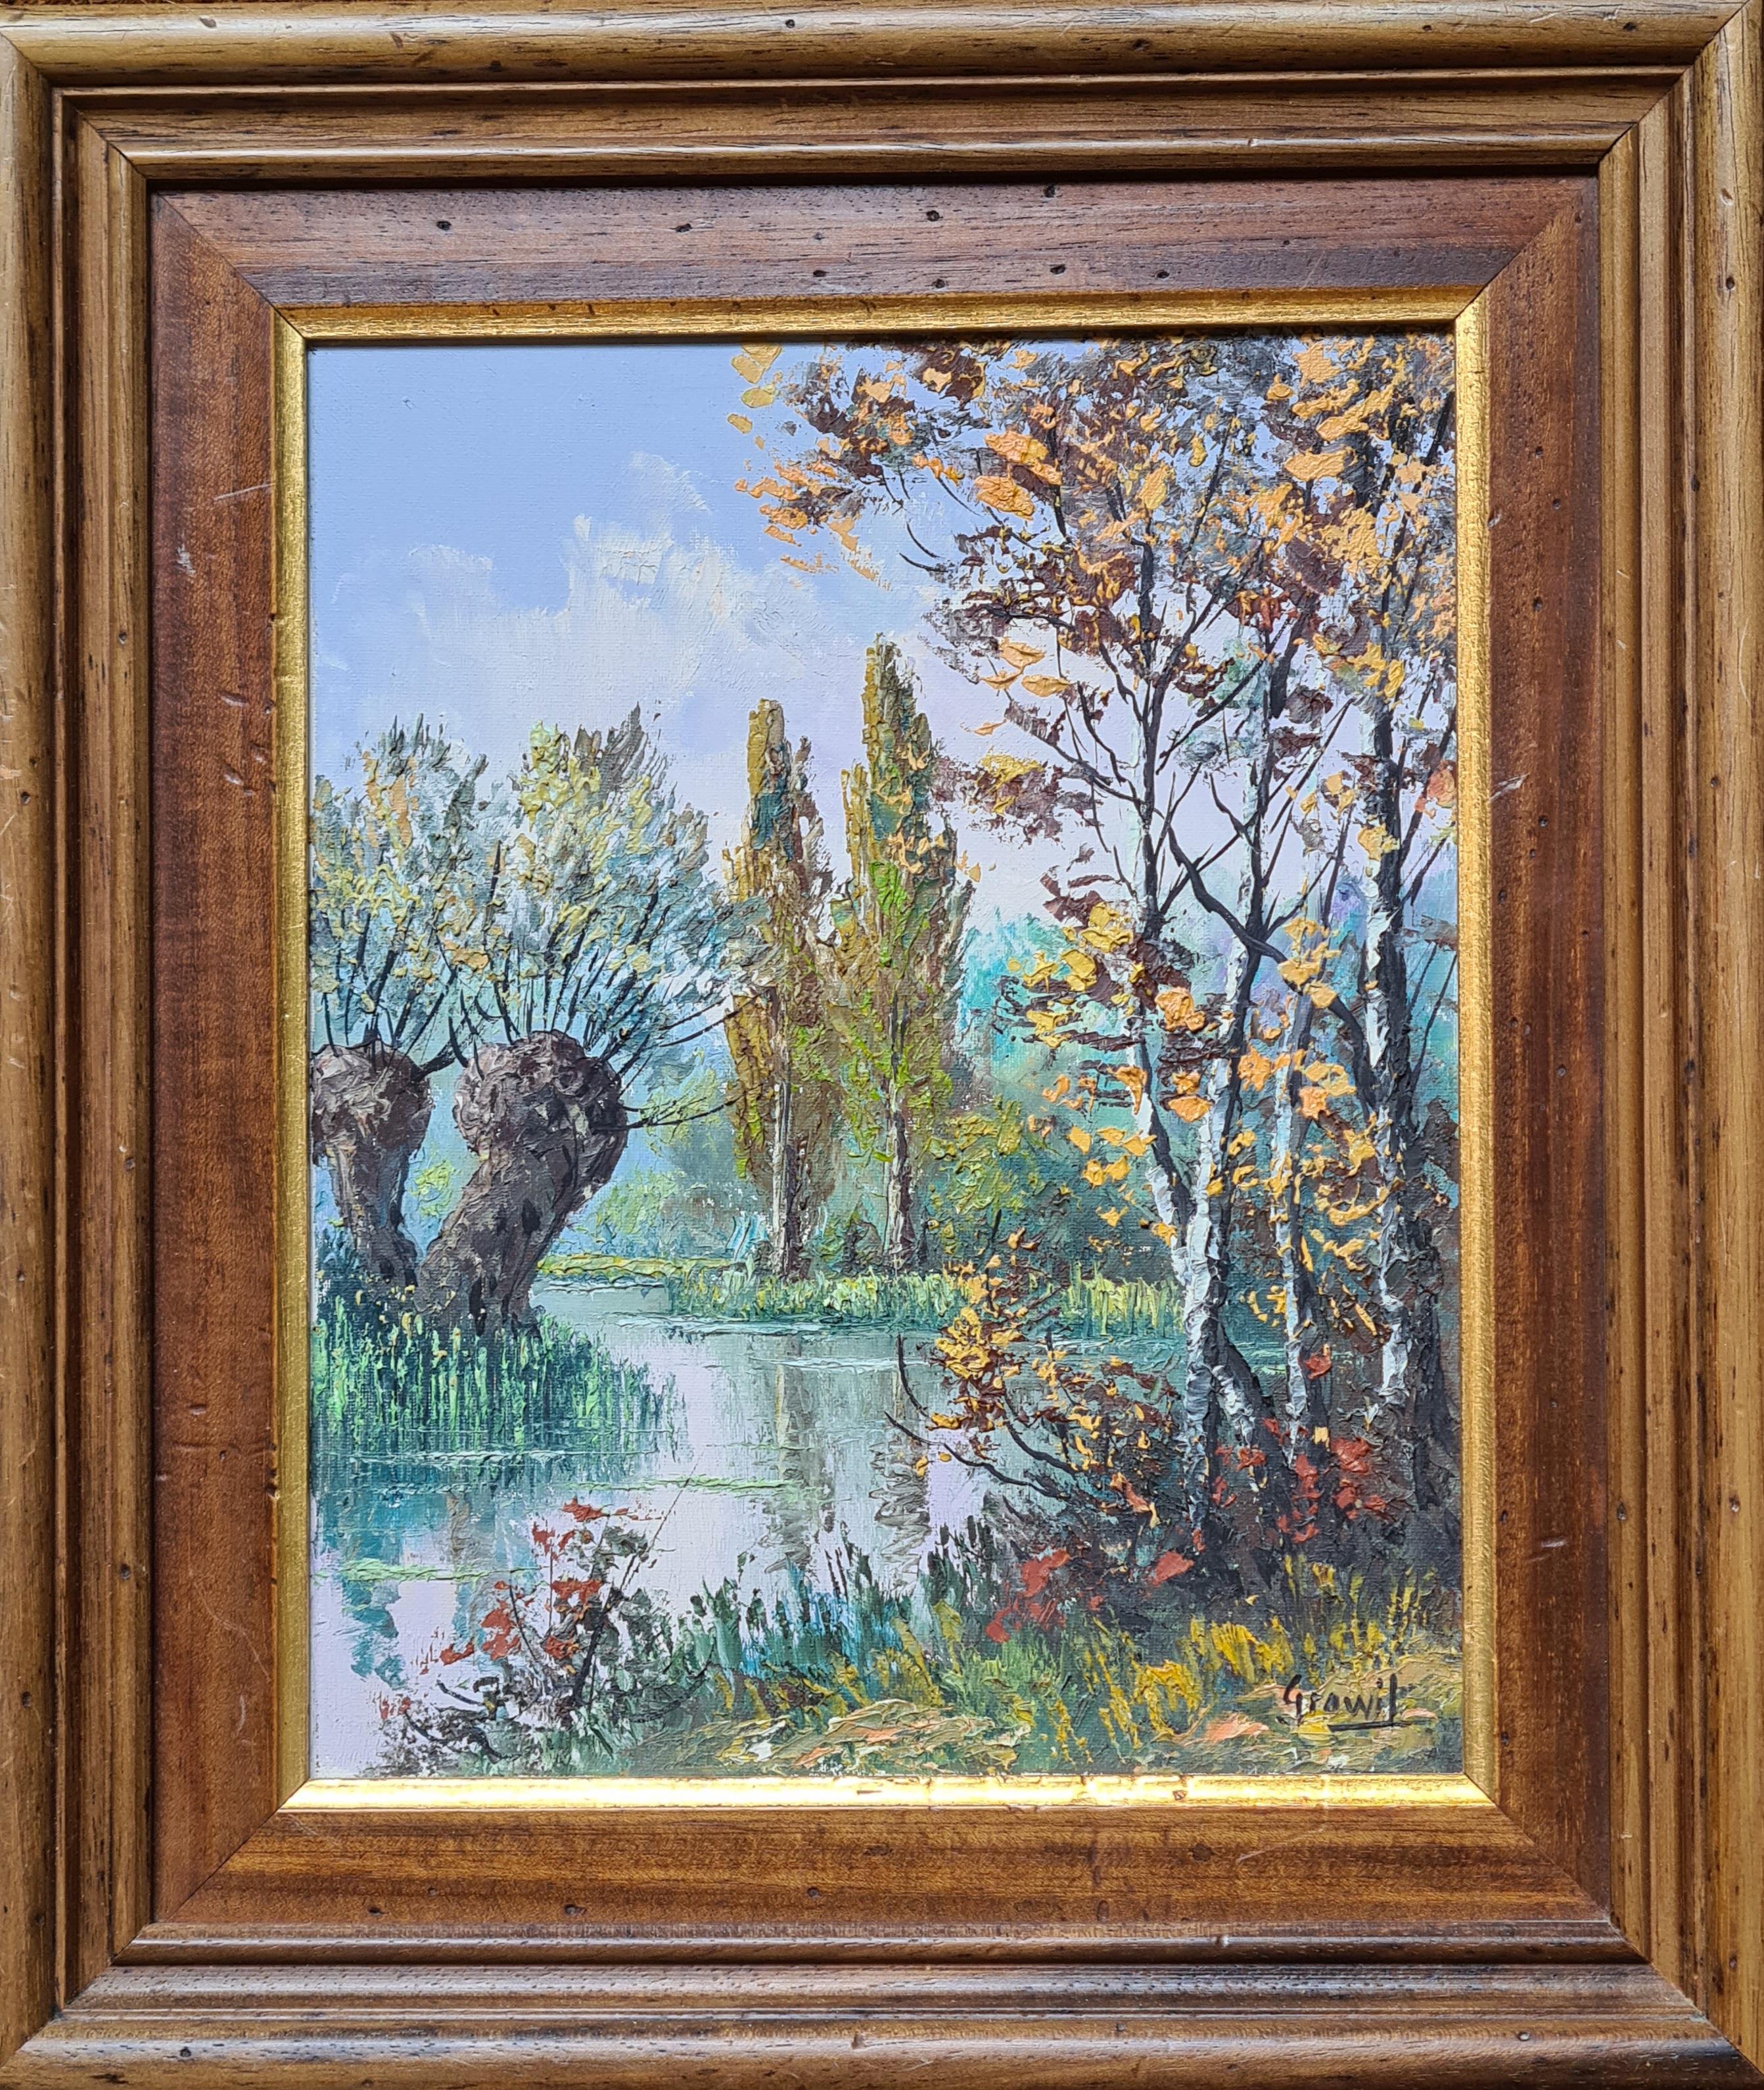 A River Runs Through It, Summer By the Riverbank - Painting by Maurice Schwab aka 'Grawil'